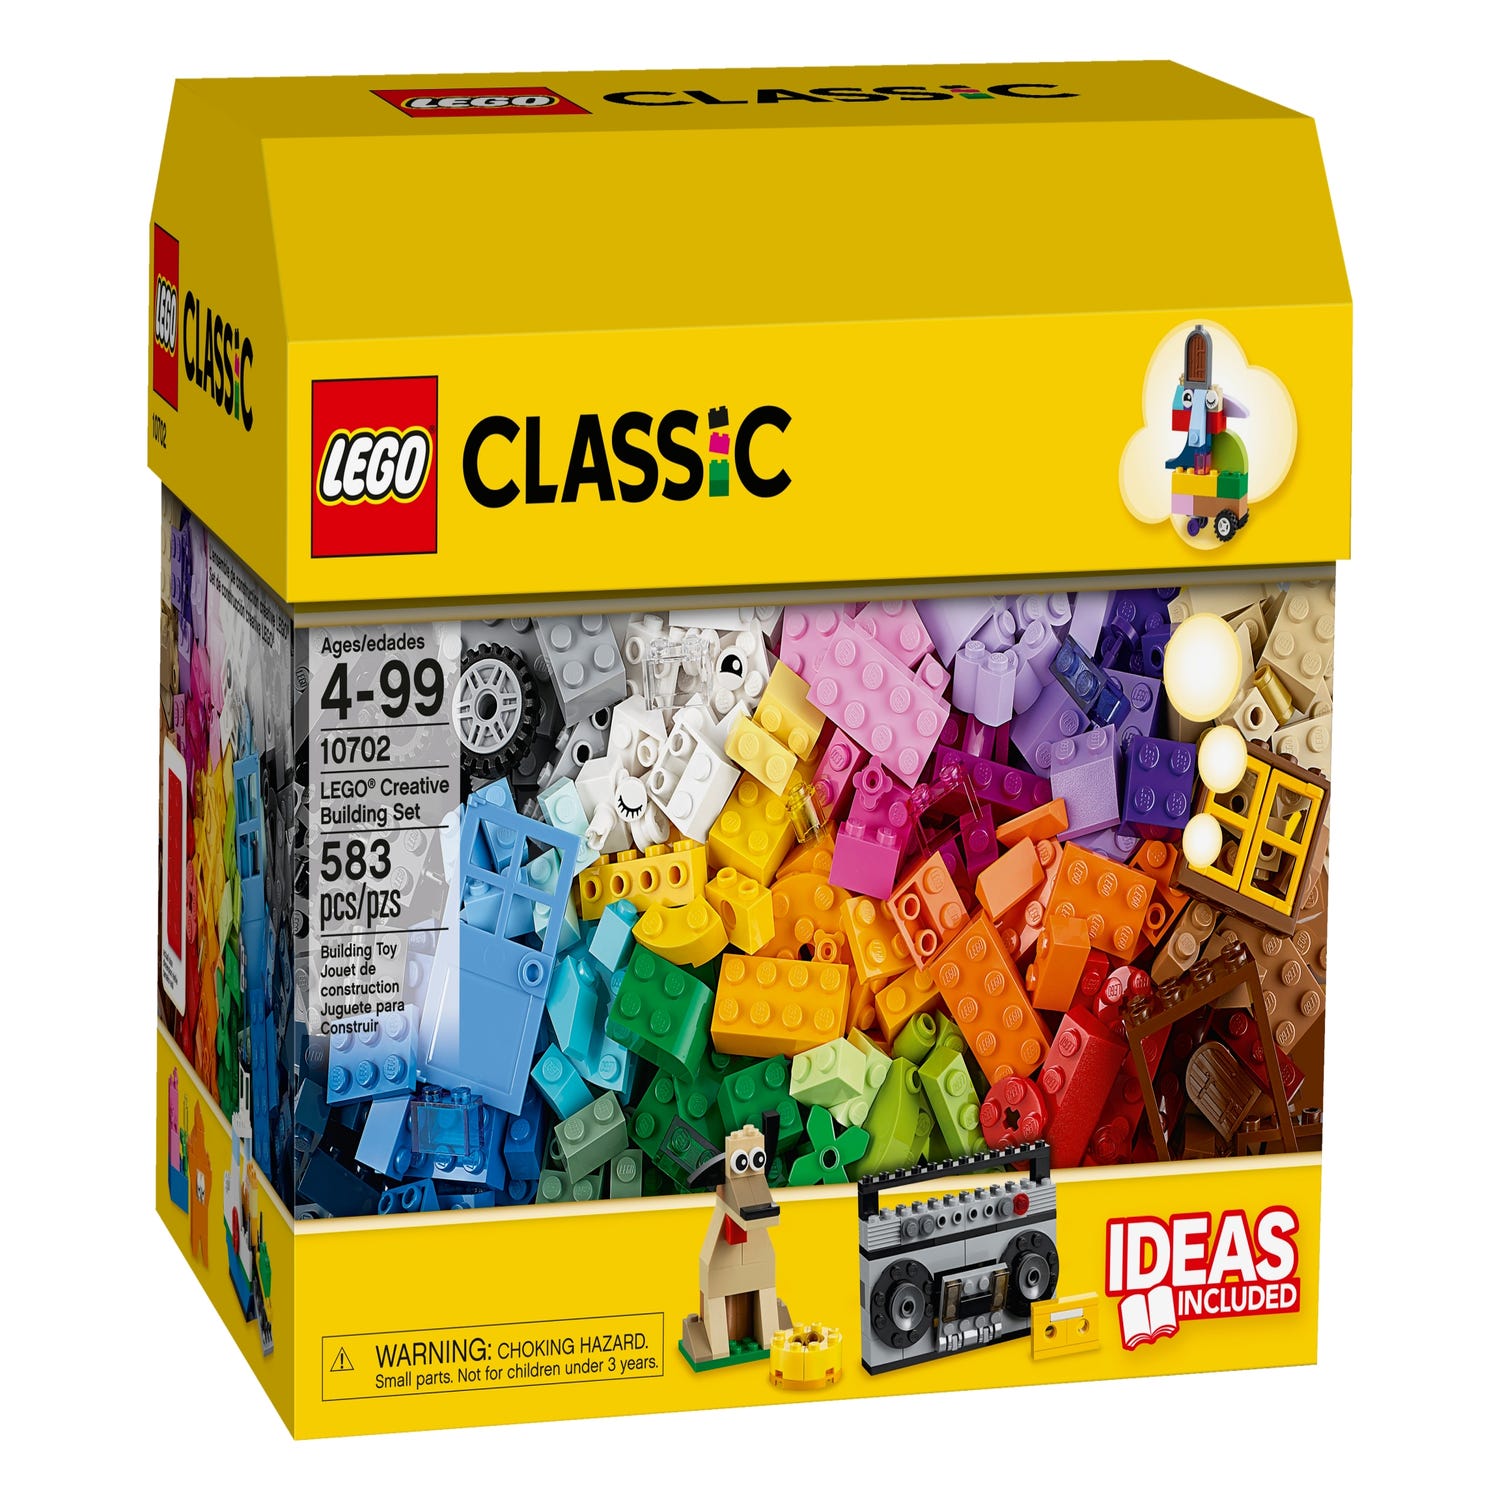 LEGO® Creative Building Set 10702 | Classic Buy online at the Official LEGO® Shop US